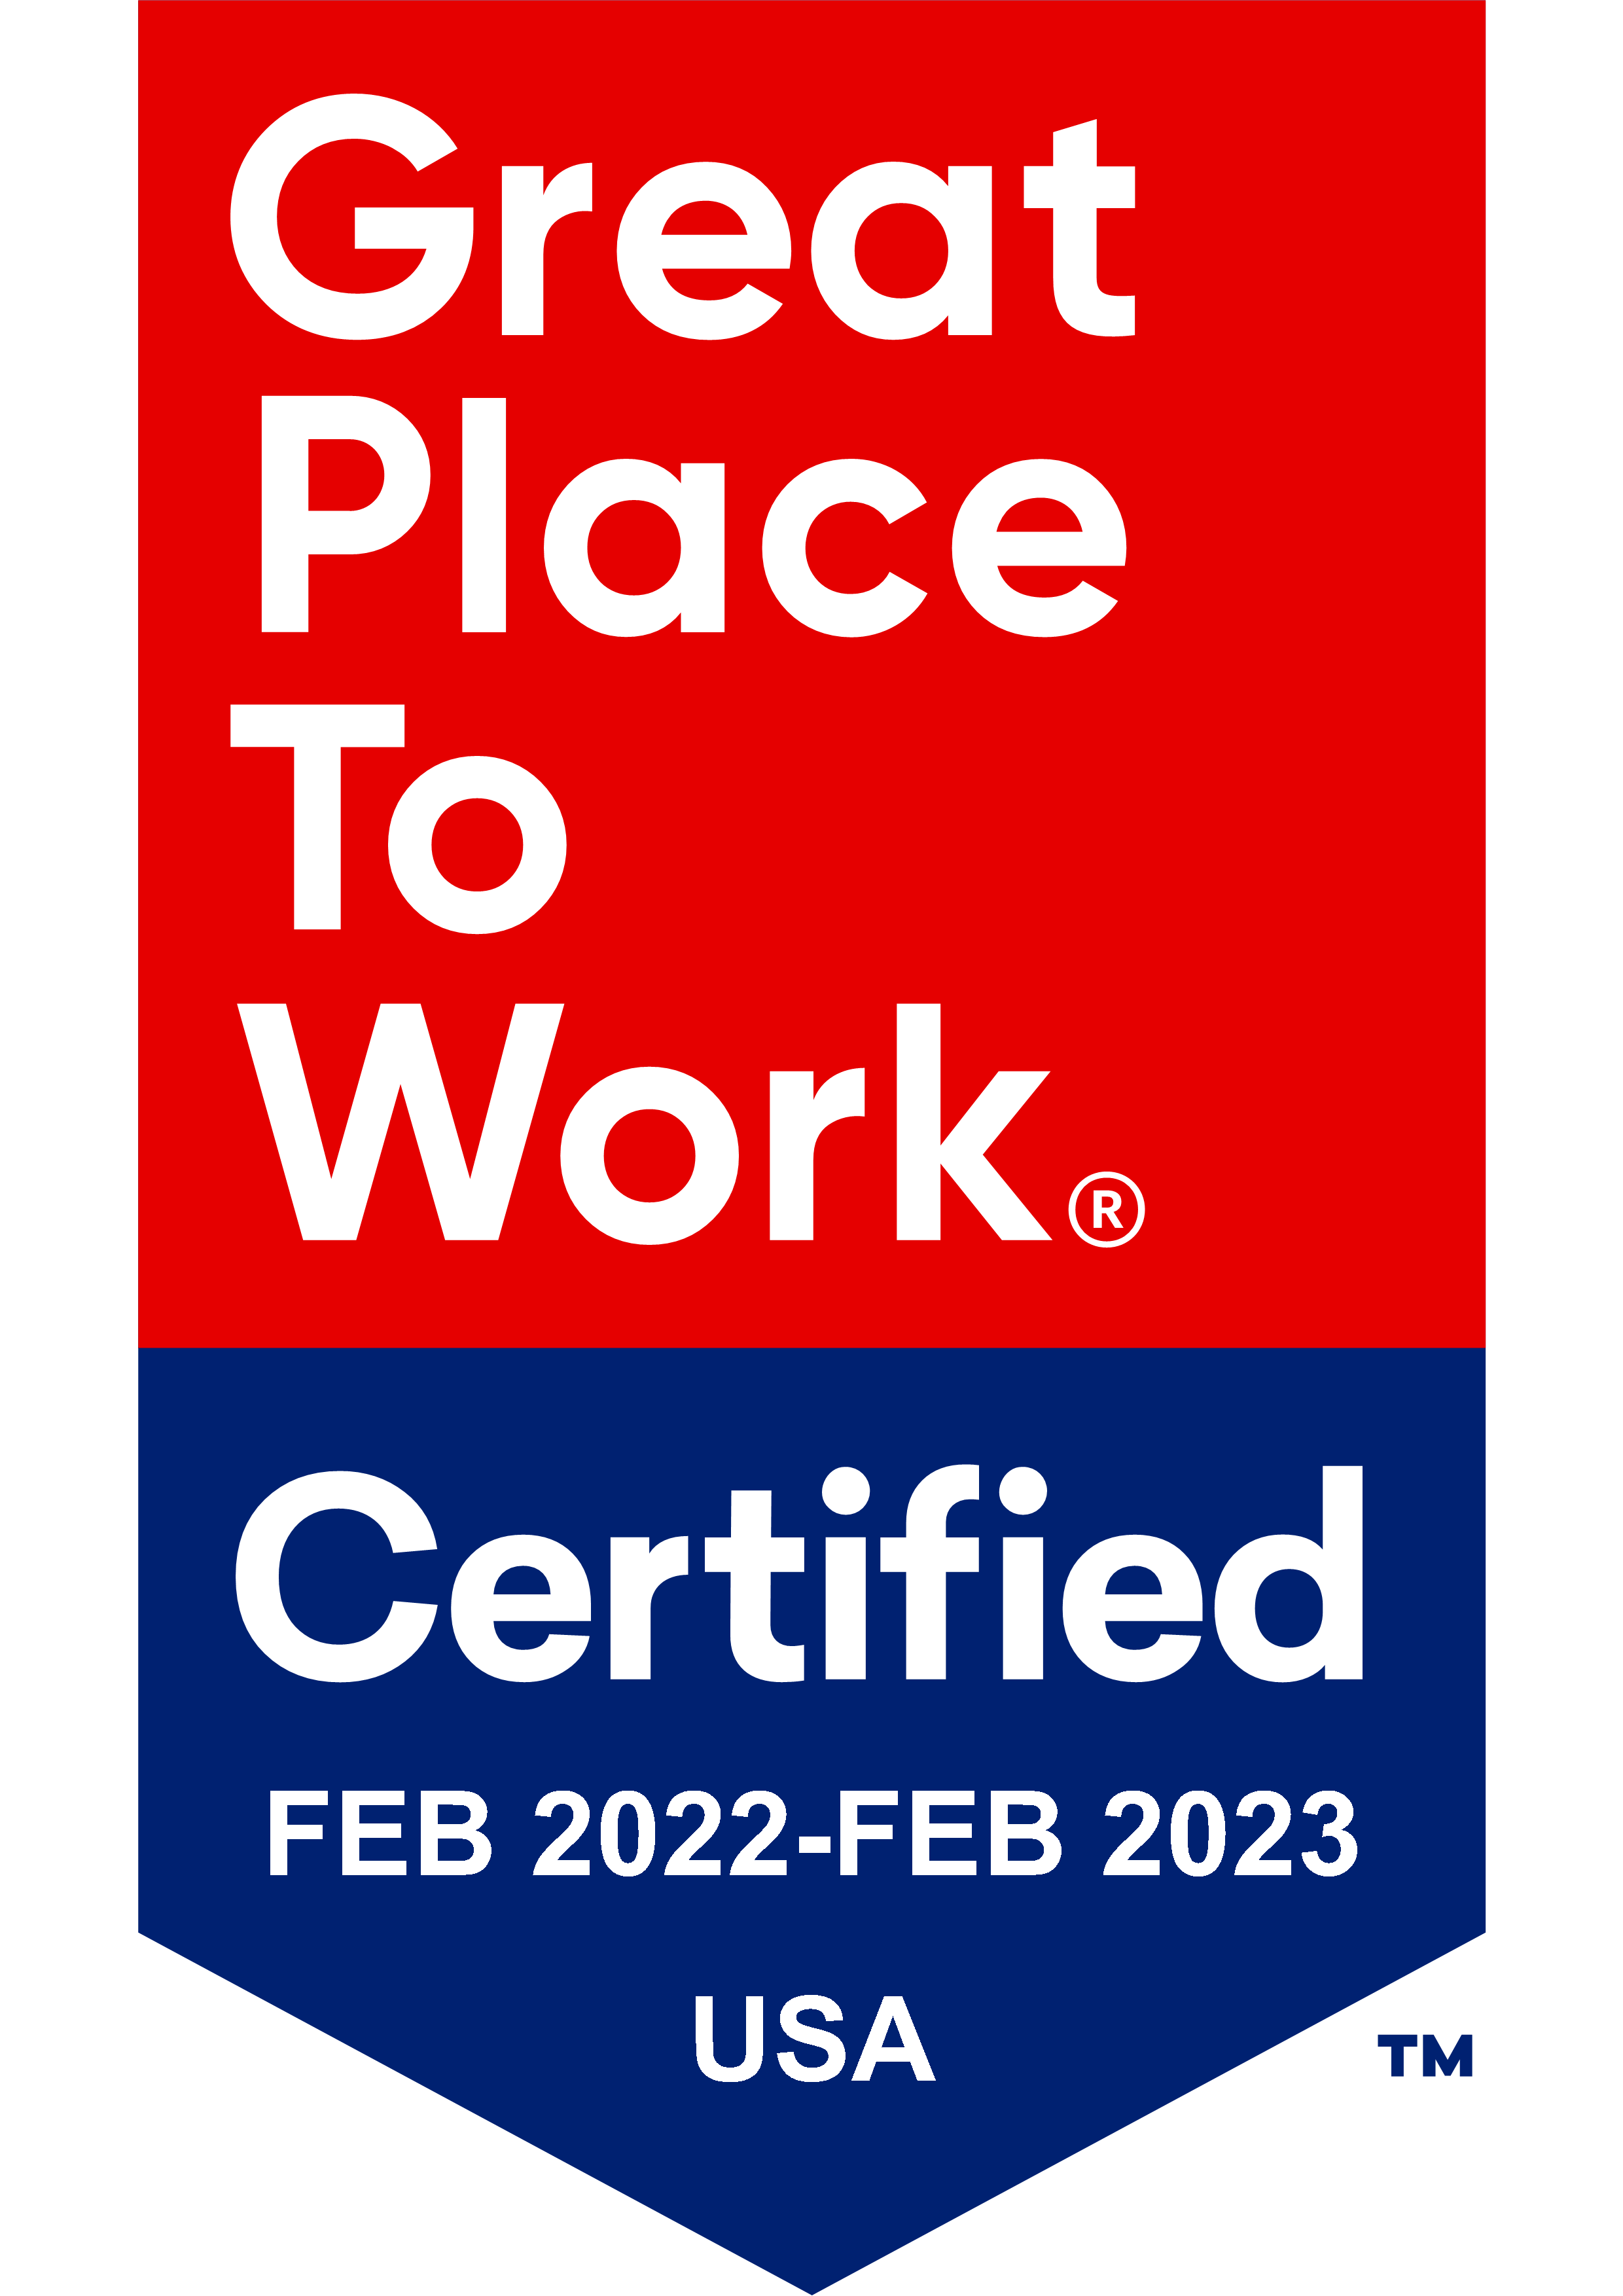 Great Place to Work | Certified | Feb 2022 - Feb 2023 USA